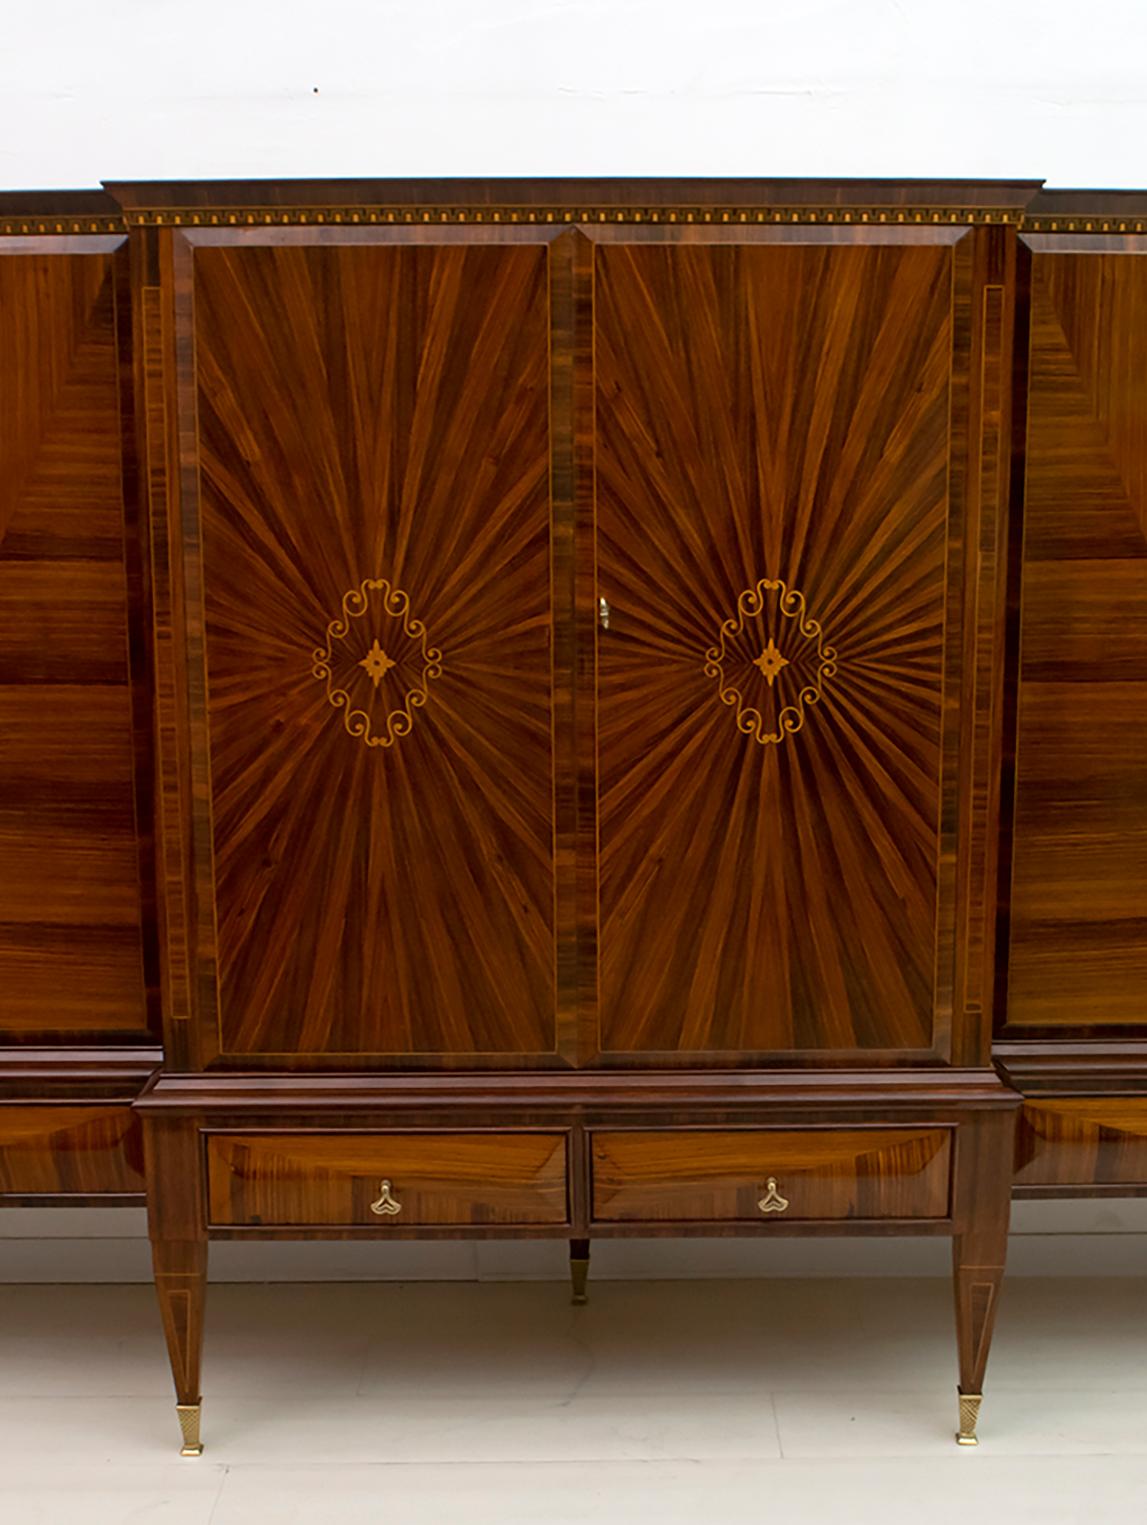 Cantù production,
Important beautiful Italian walnut bar sideboard strongly attributed to Paolo Buffa, typical workmanship of the mid-20th century; in walnut with maple wood inlays. With six doors and six rounded drawers in walnut applied in a